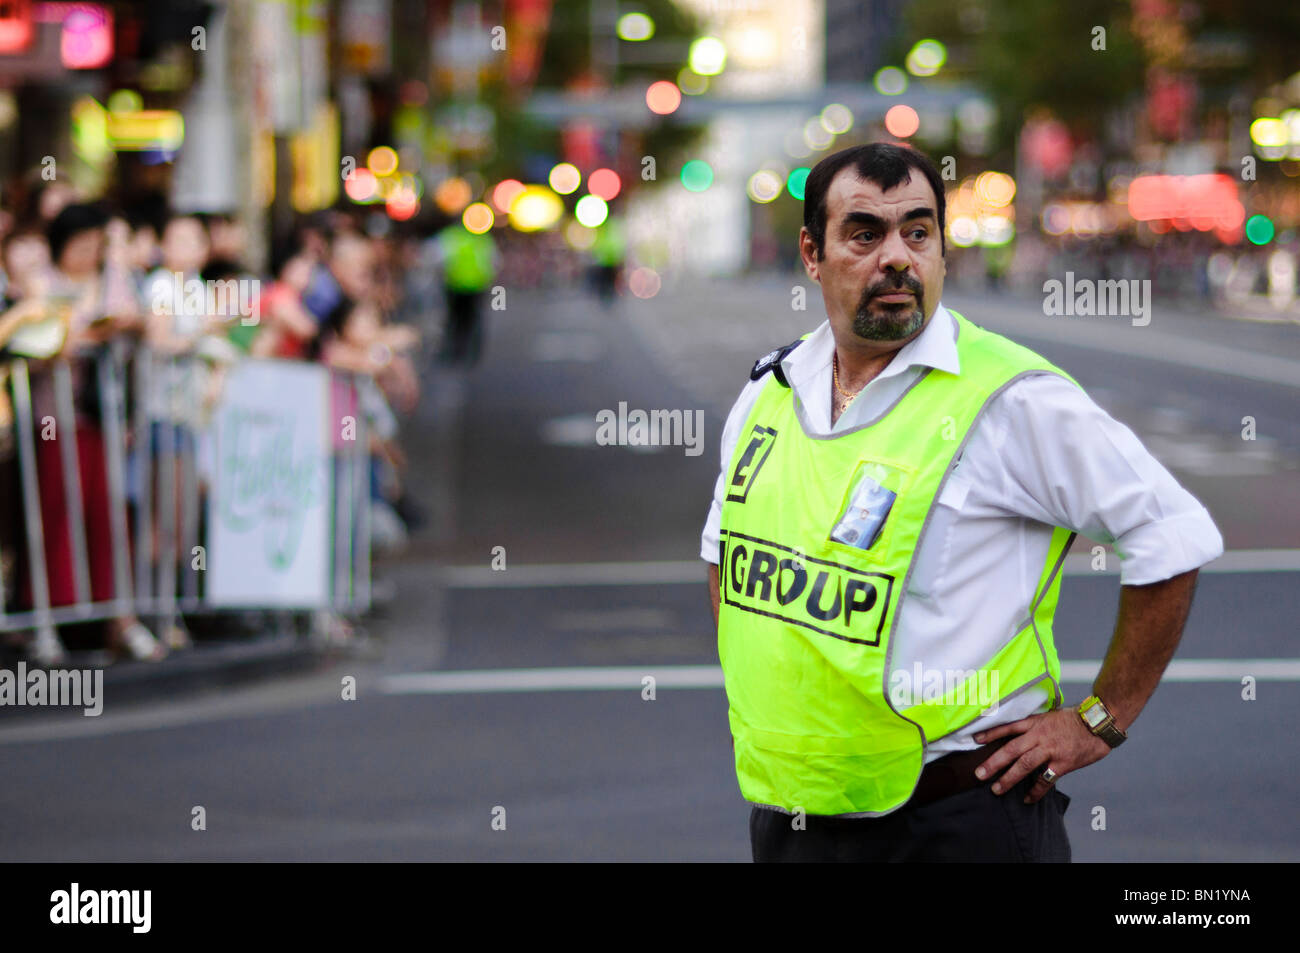 Security guard on duty at an evening / night event Stock Photo